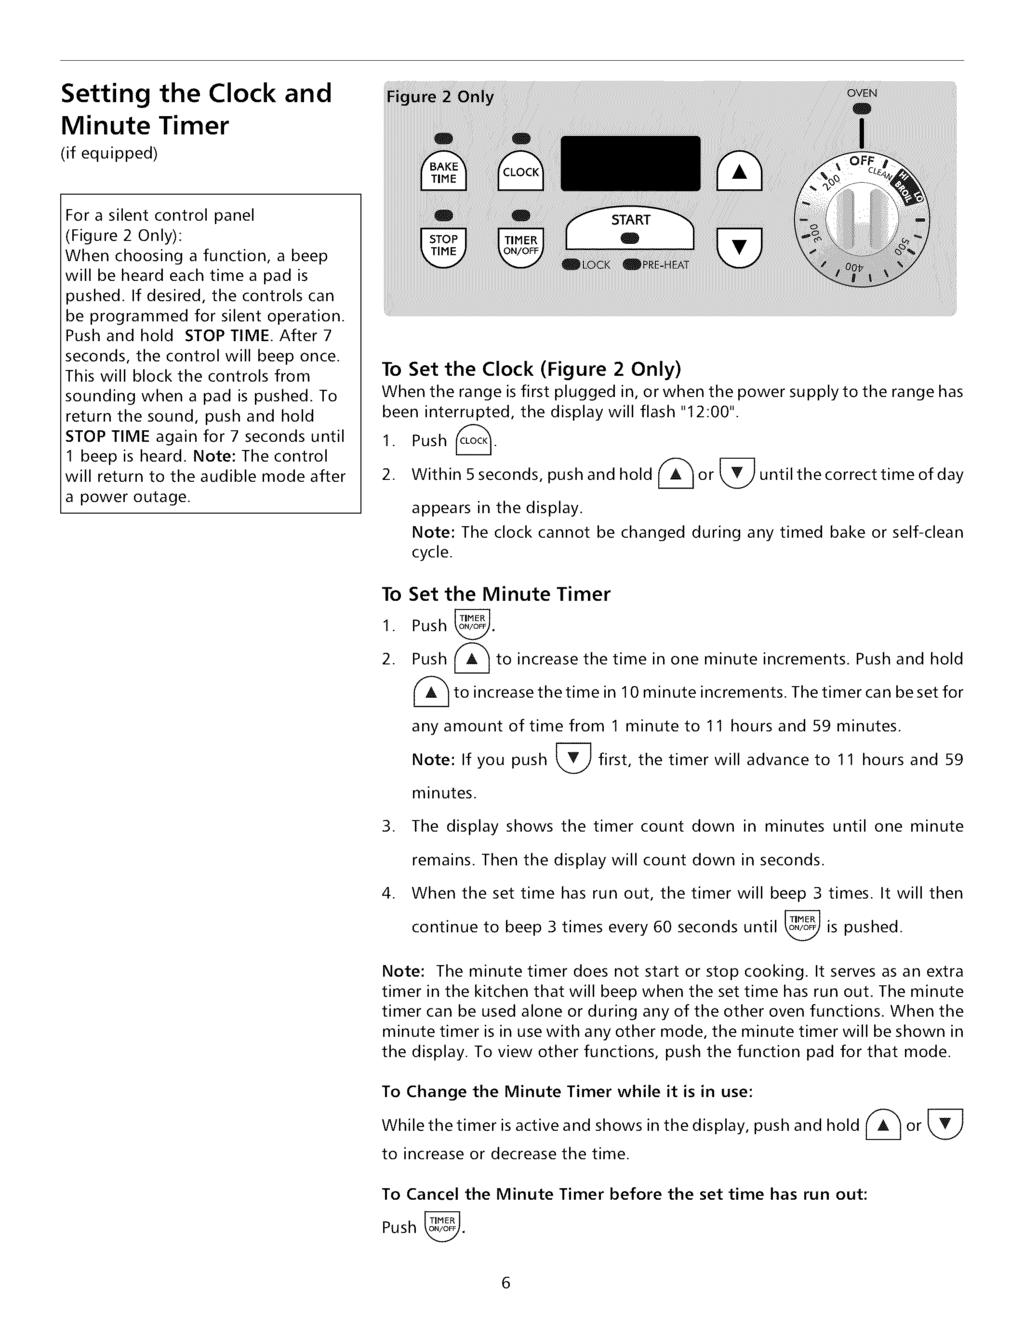 Setting the Clock and Minute Timer (if equipped) For a silent control panel (Figure 2 Only): When choosing a function, a beep will be heard each time a pad is pushed.